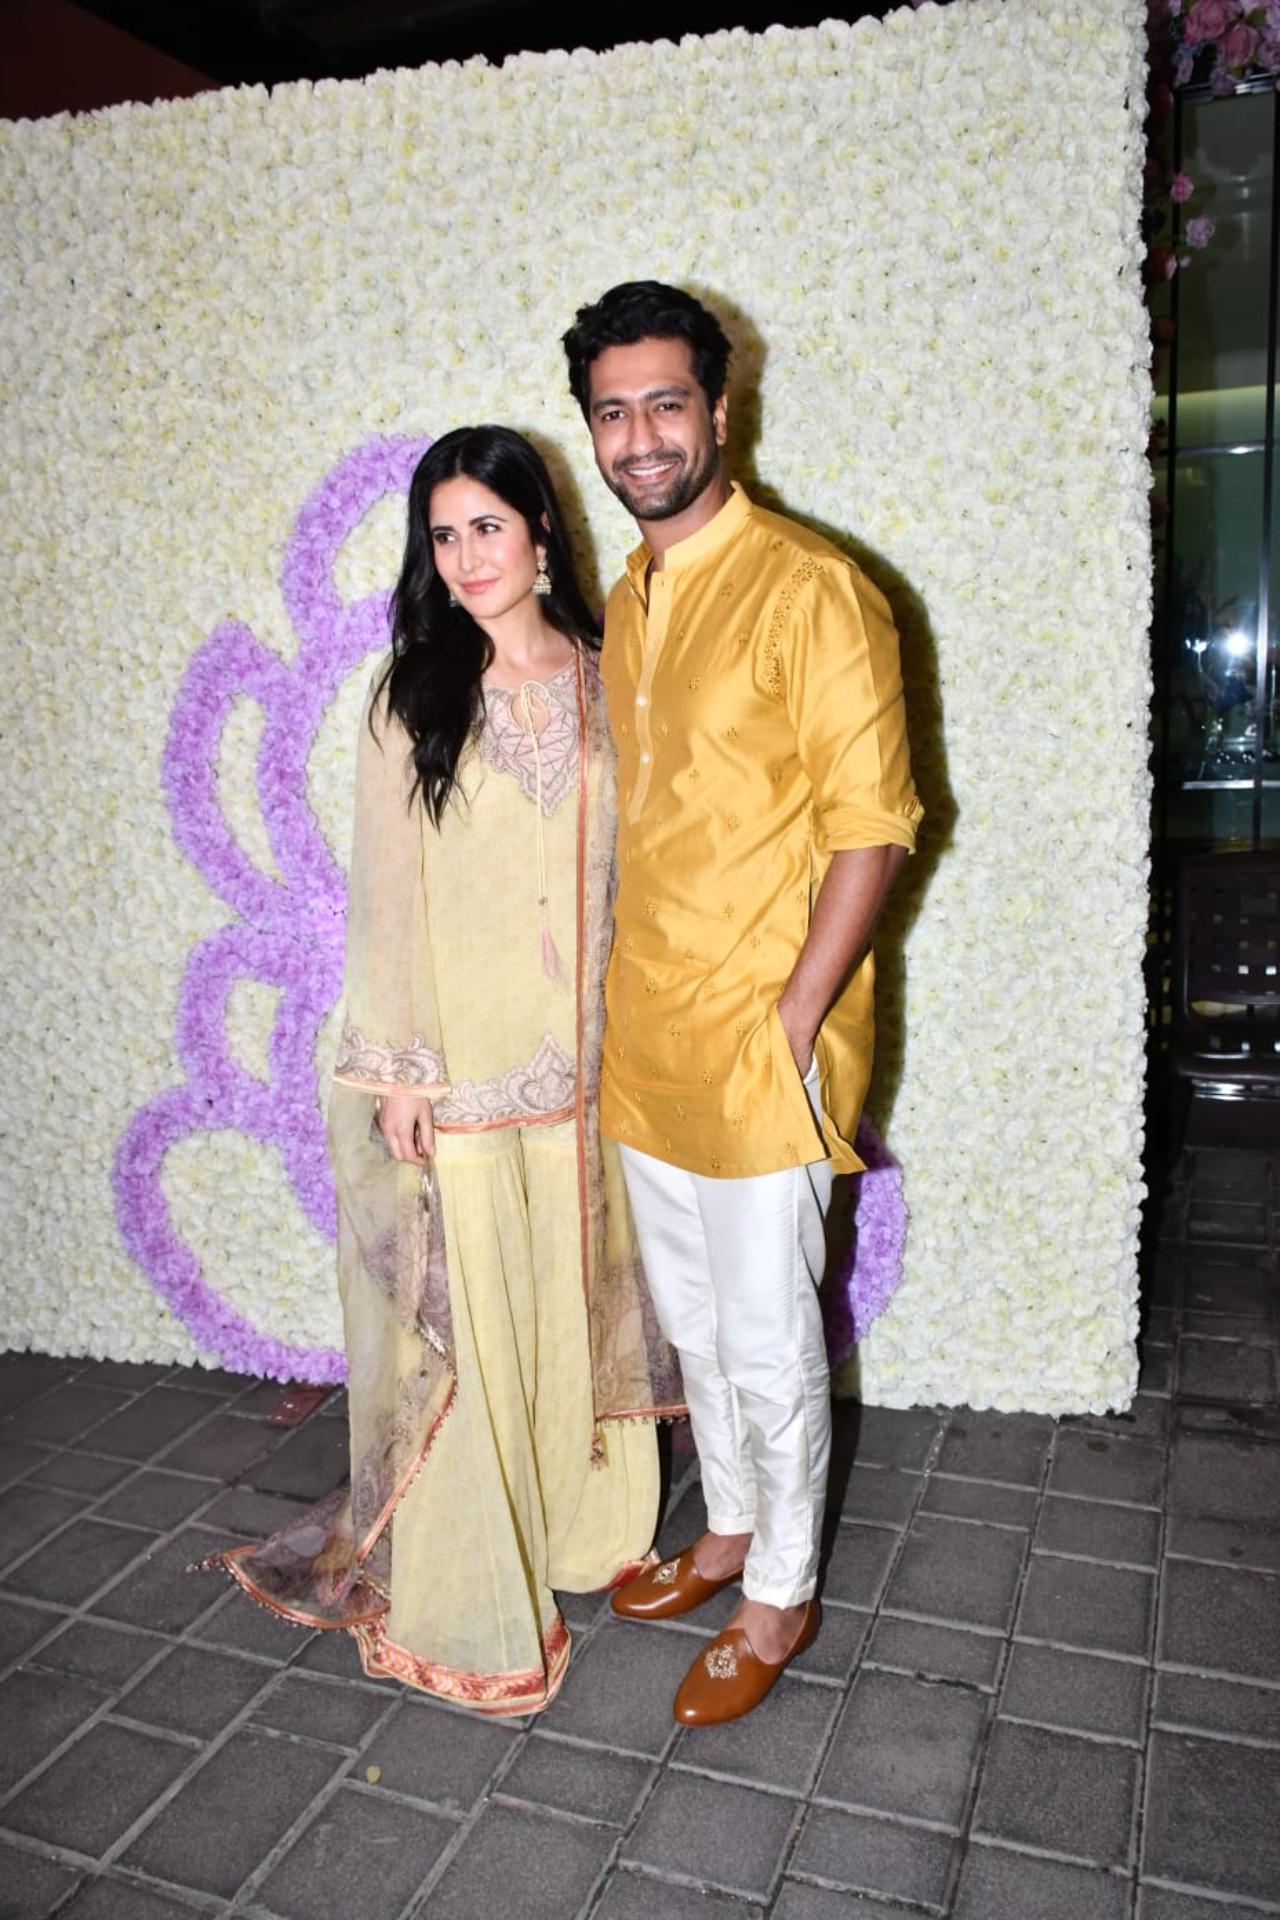 Newly weds Vicky Kaushal and Katrina Kaif twinned in yellow as they arrived for the Ganpati darshan. Katrina shares a close bond with Arpita and visits her house every year for Ganesh Chaturthi. The newly weds flashed a wide smile for the paparazzi before they stepped in